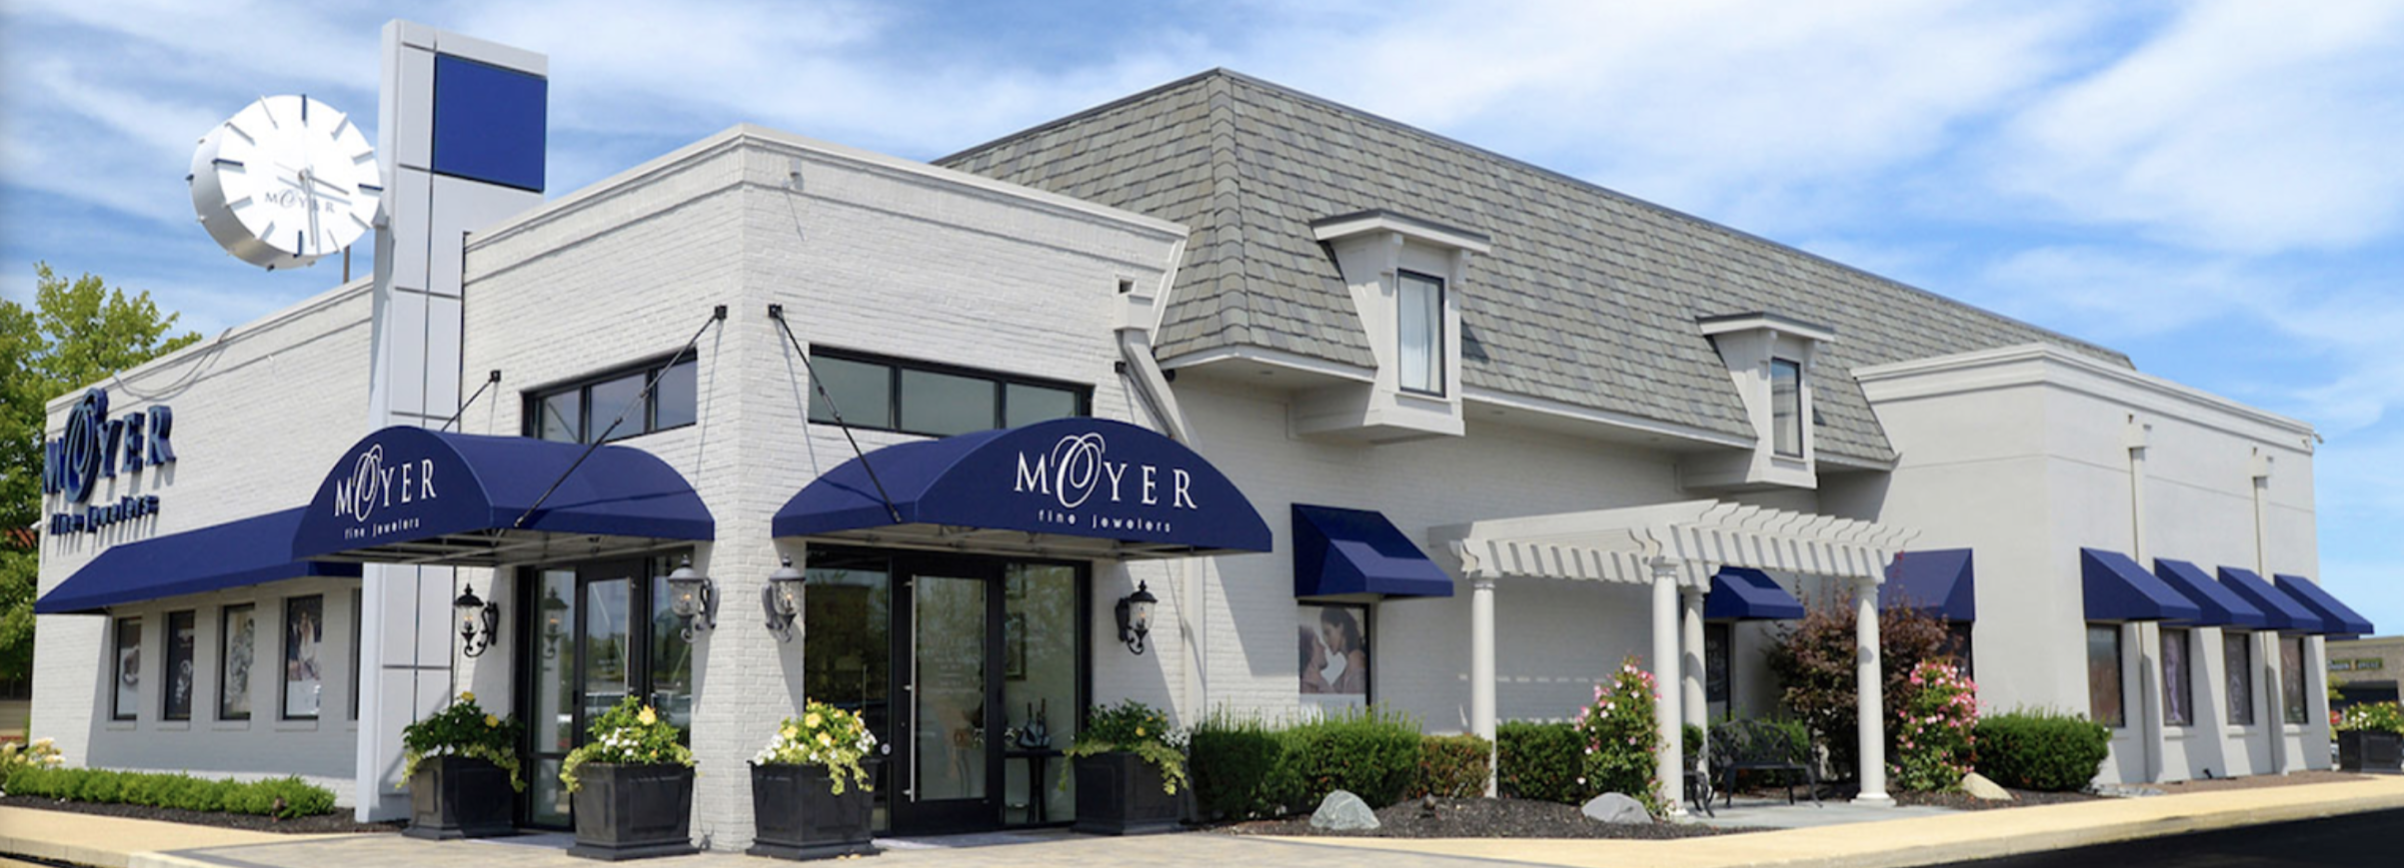 WatchTime to Host Collectors’ Event with Moyer Fine Jewelers in Carmel, Indiana on May 16